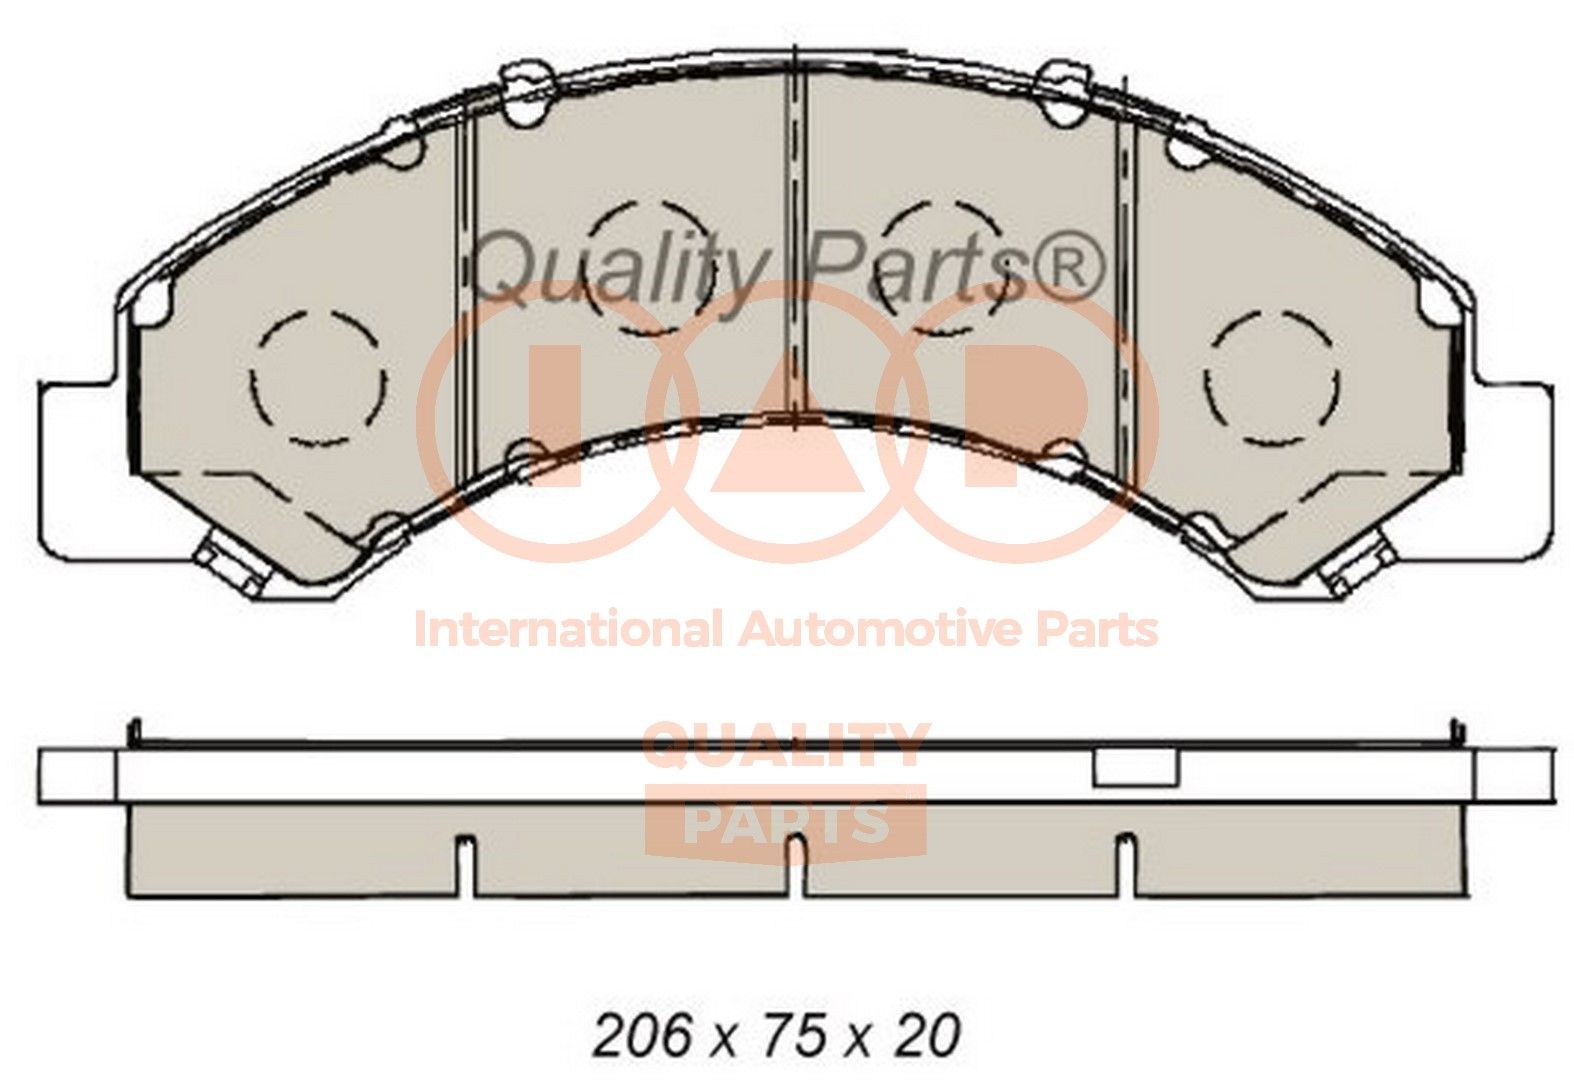 IAP QUALITY PARTS Front Axle Height 1: 75mm, Width 1: 206mm, Thickness 1: 20mm Brake pads 704-09090 buy